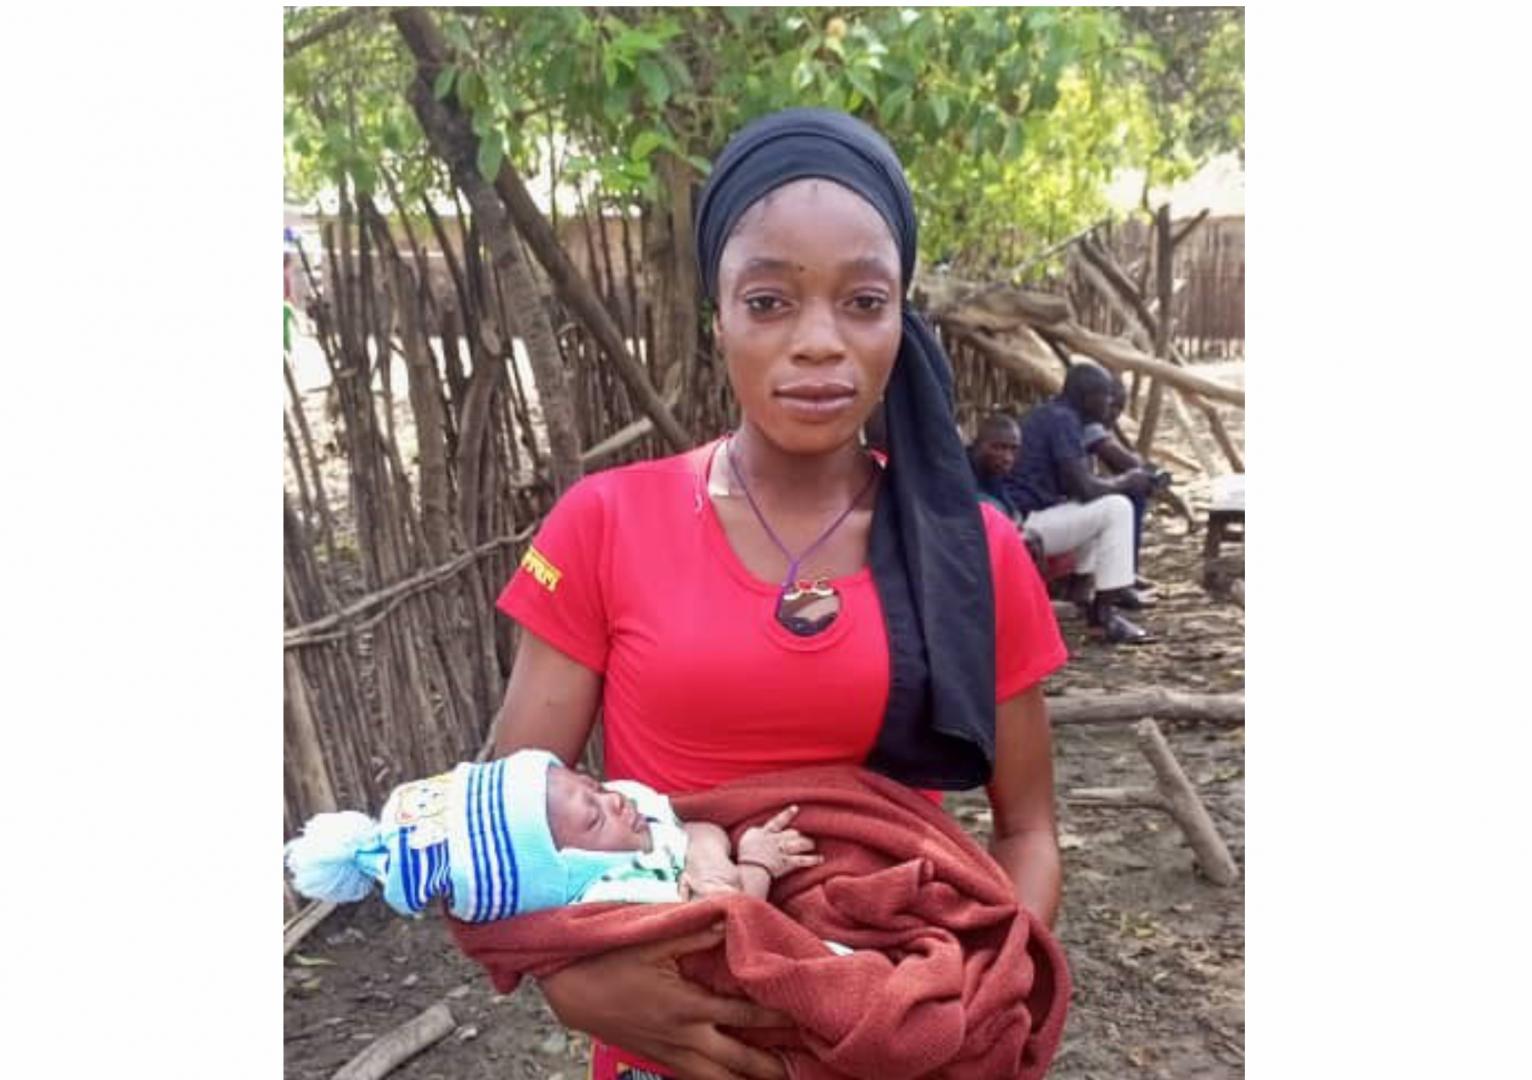 One of the mothers who gave birth at theIDP camp